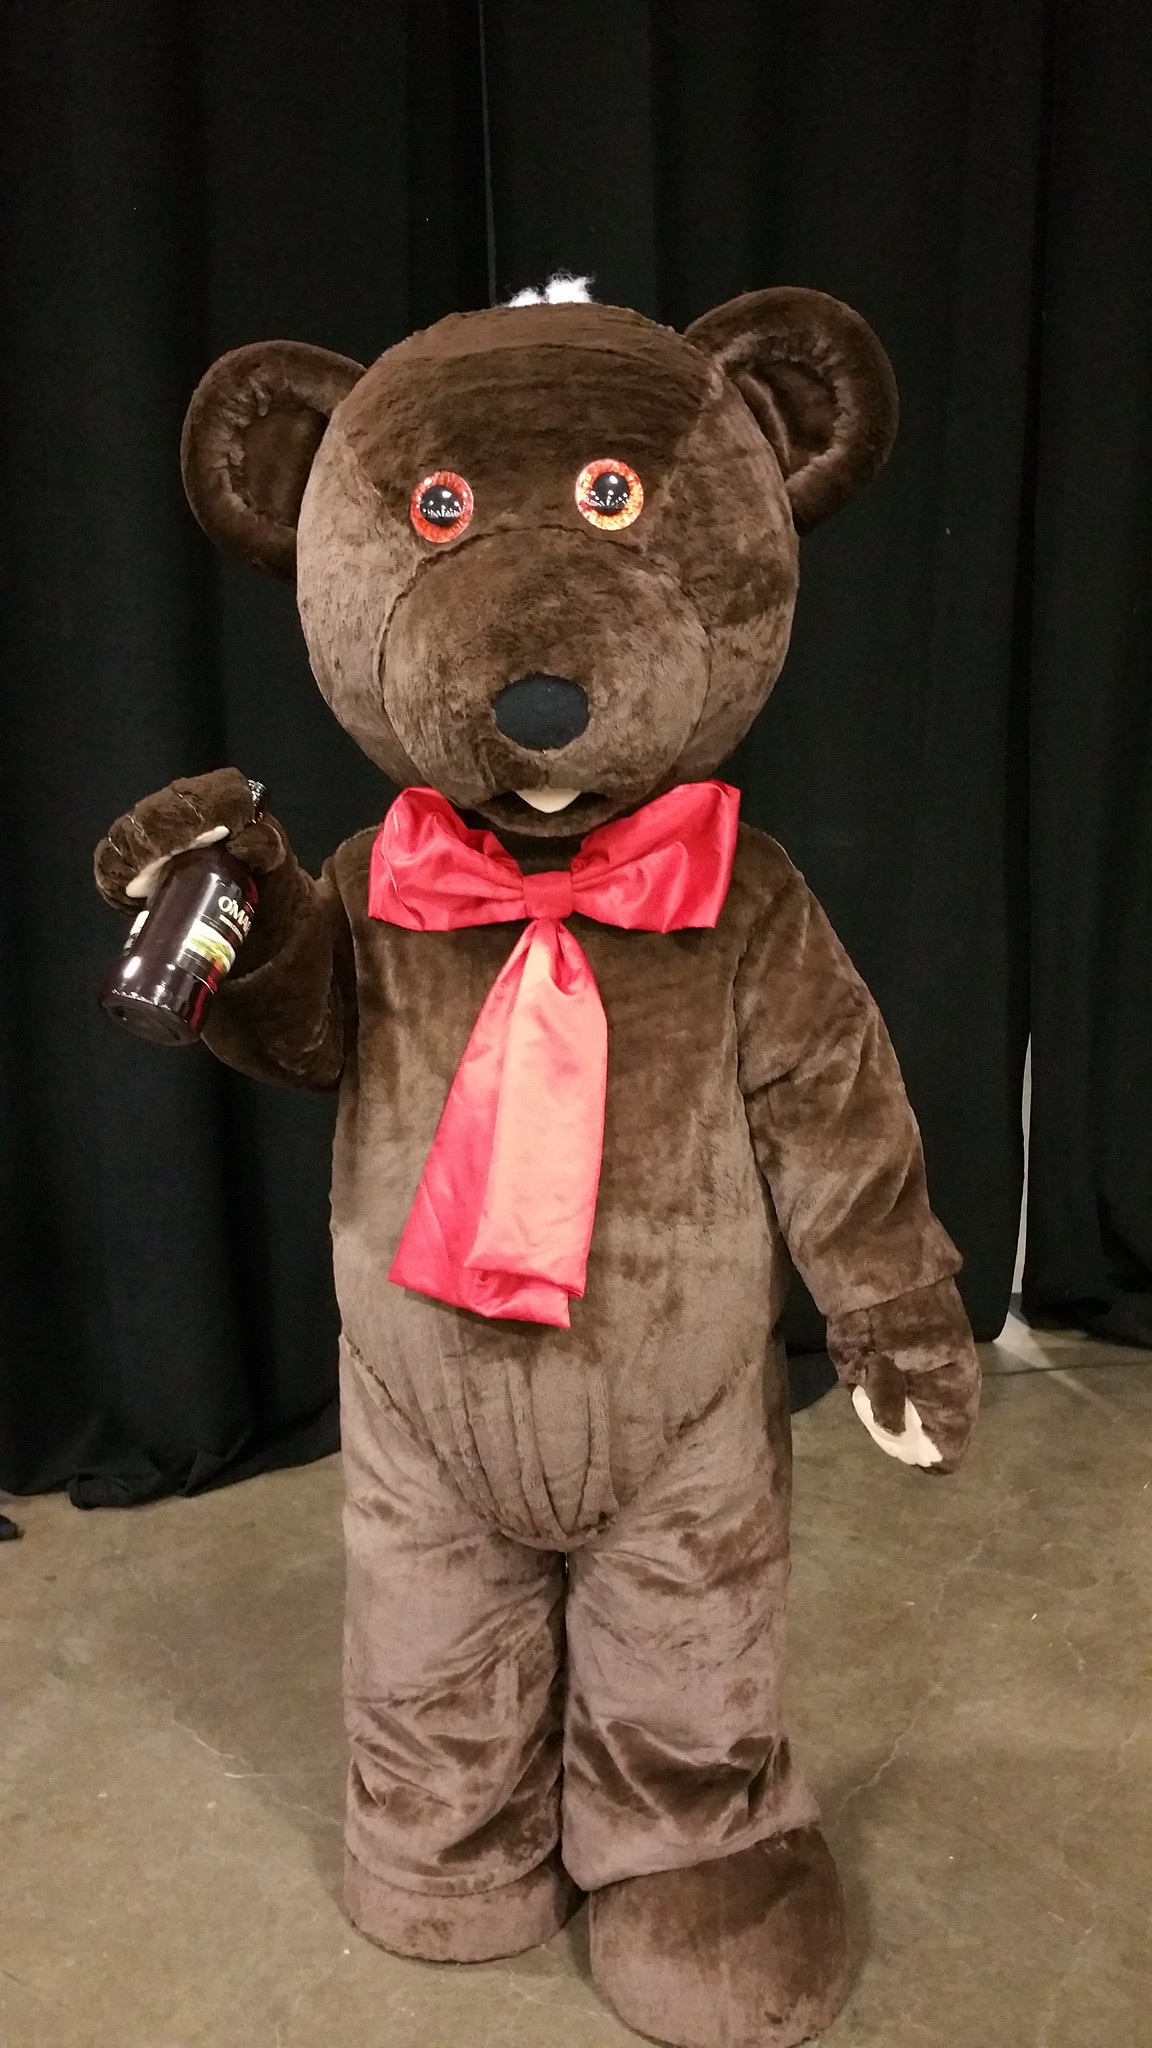 Cosplay of the suicidal teddy bear from an episode of Supernatural